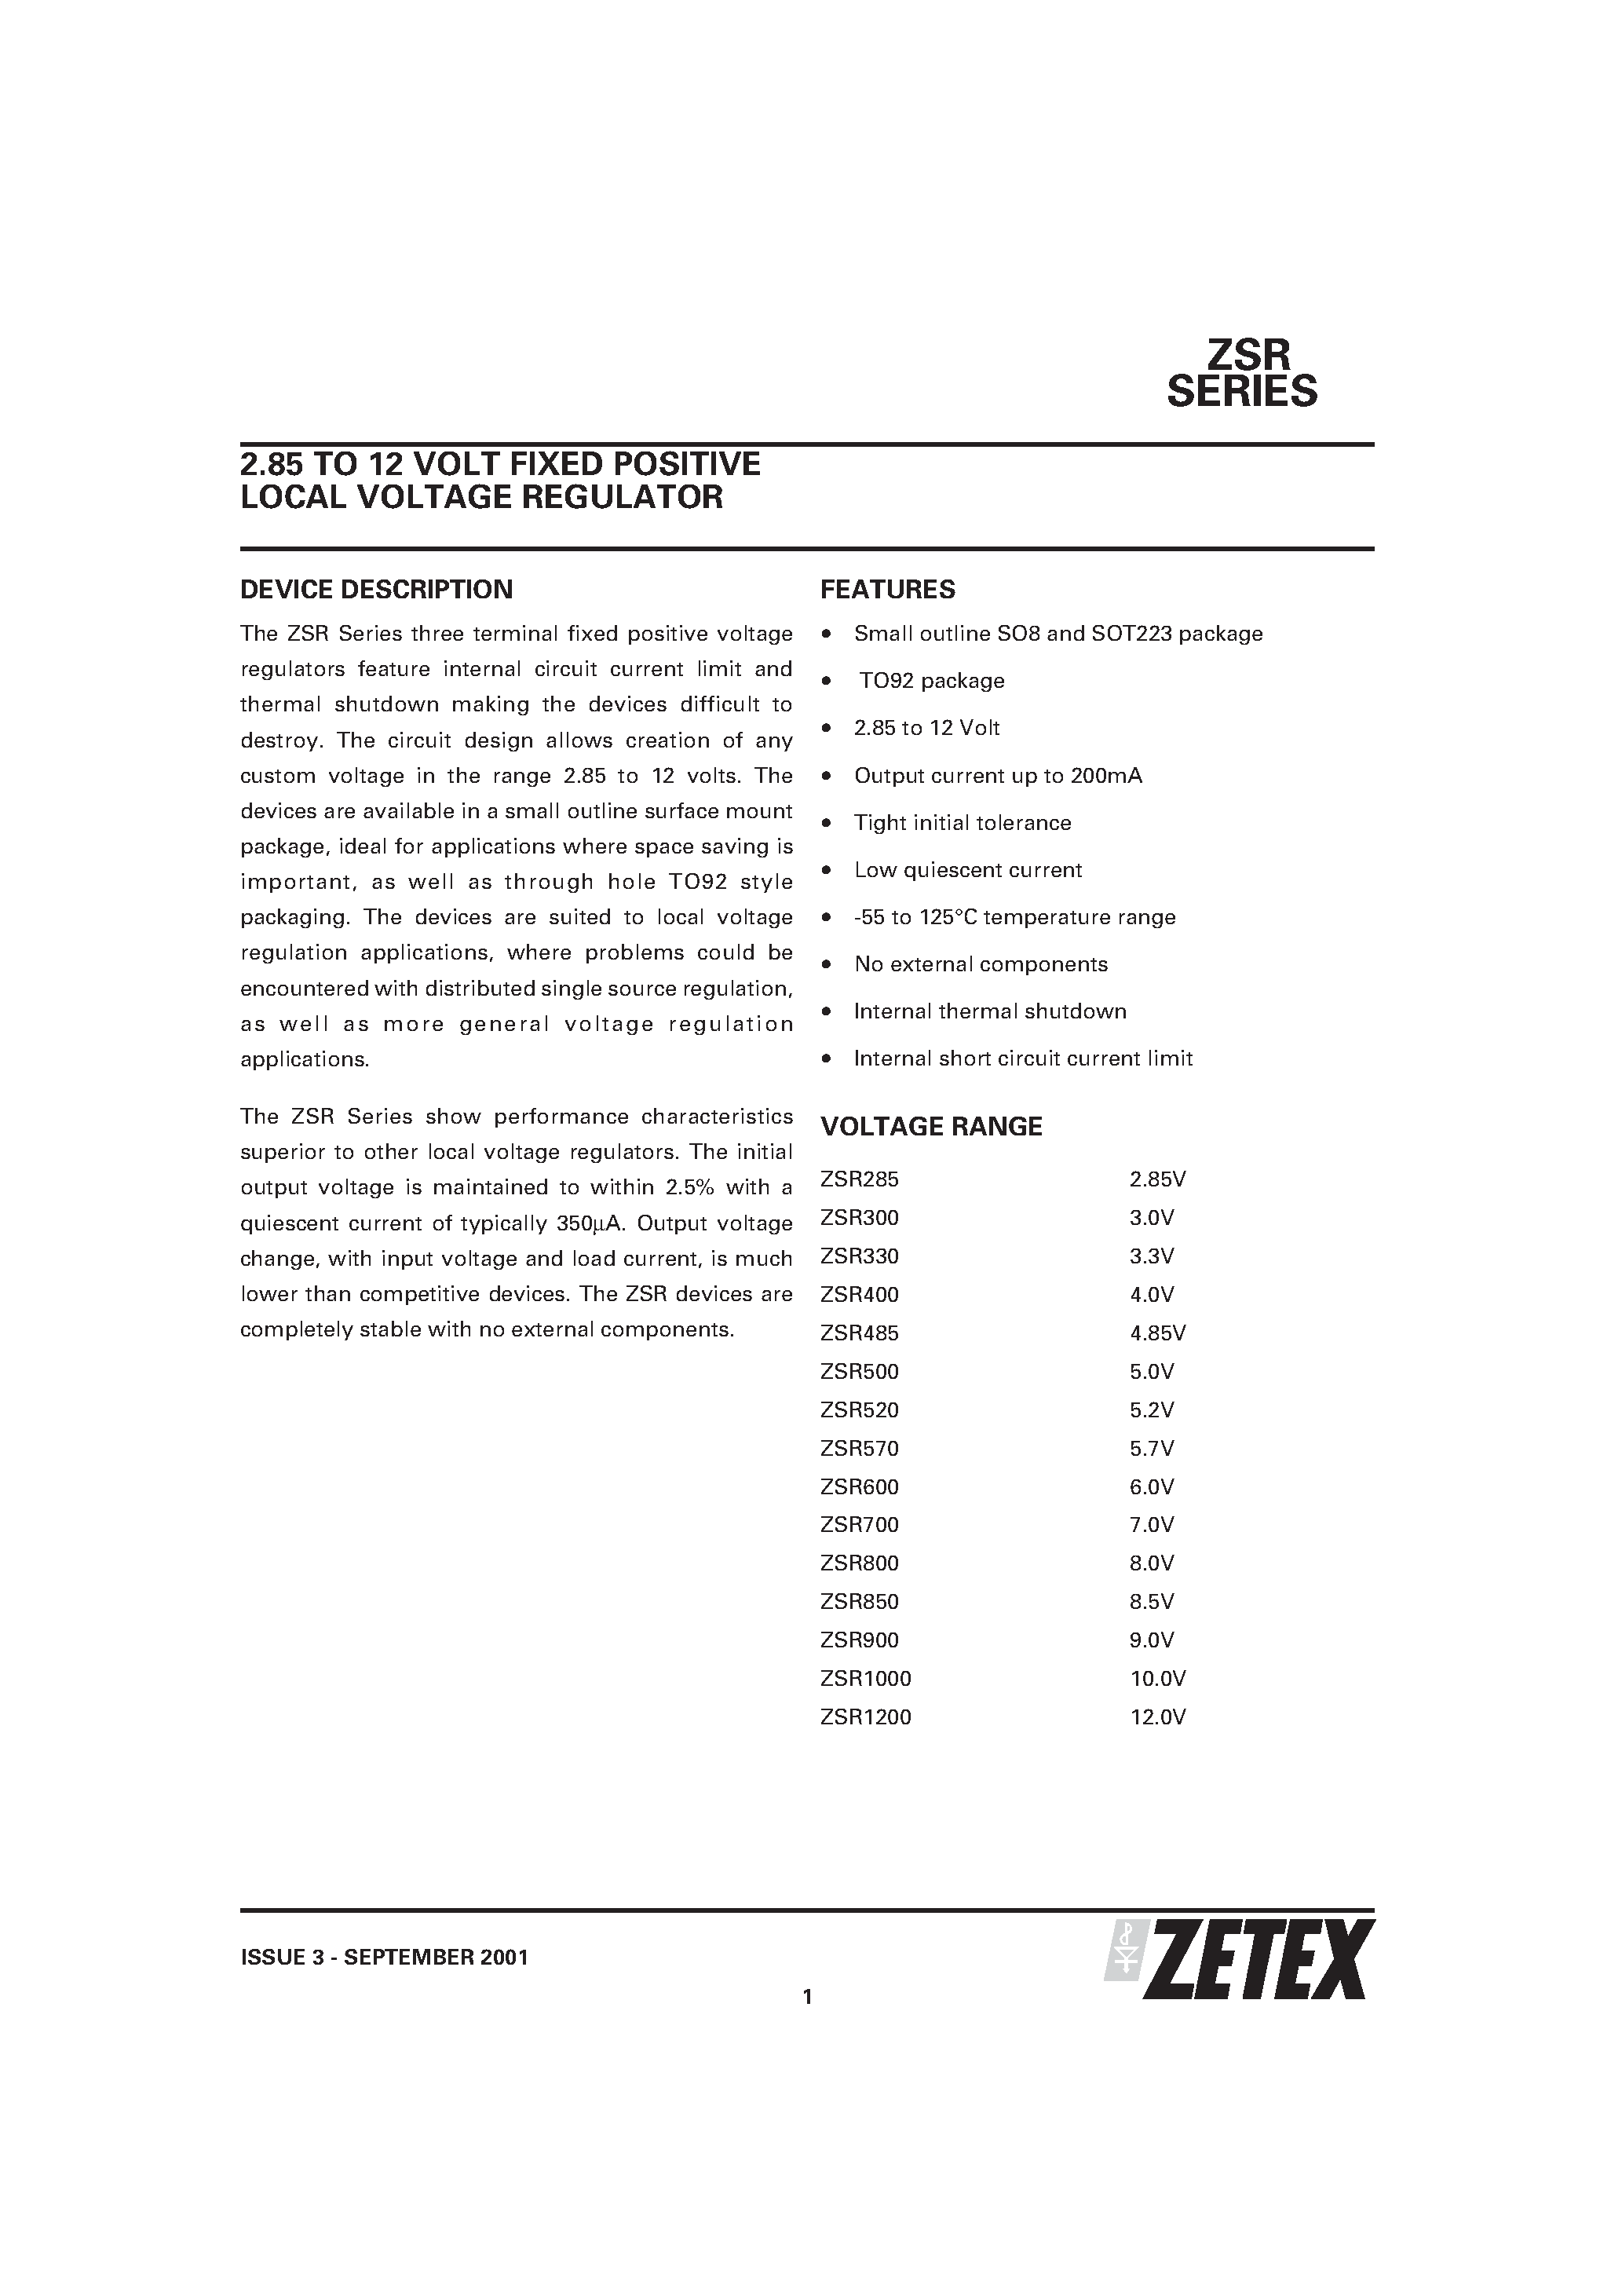 Datasheet ZSR285C - 2.85 TO 12 VOLT FIXED POSITIVE LOCAL VOLTAGE REGULATOR page 1